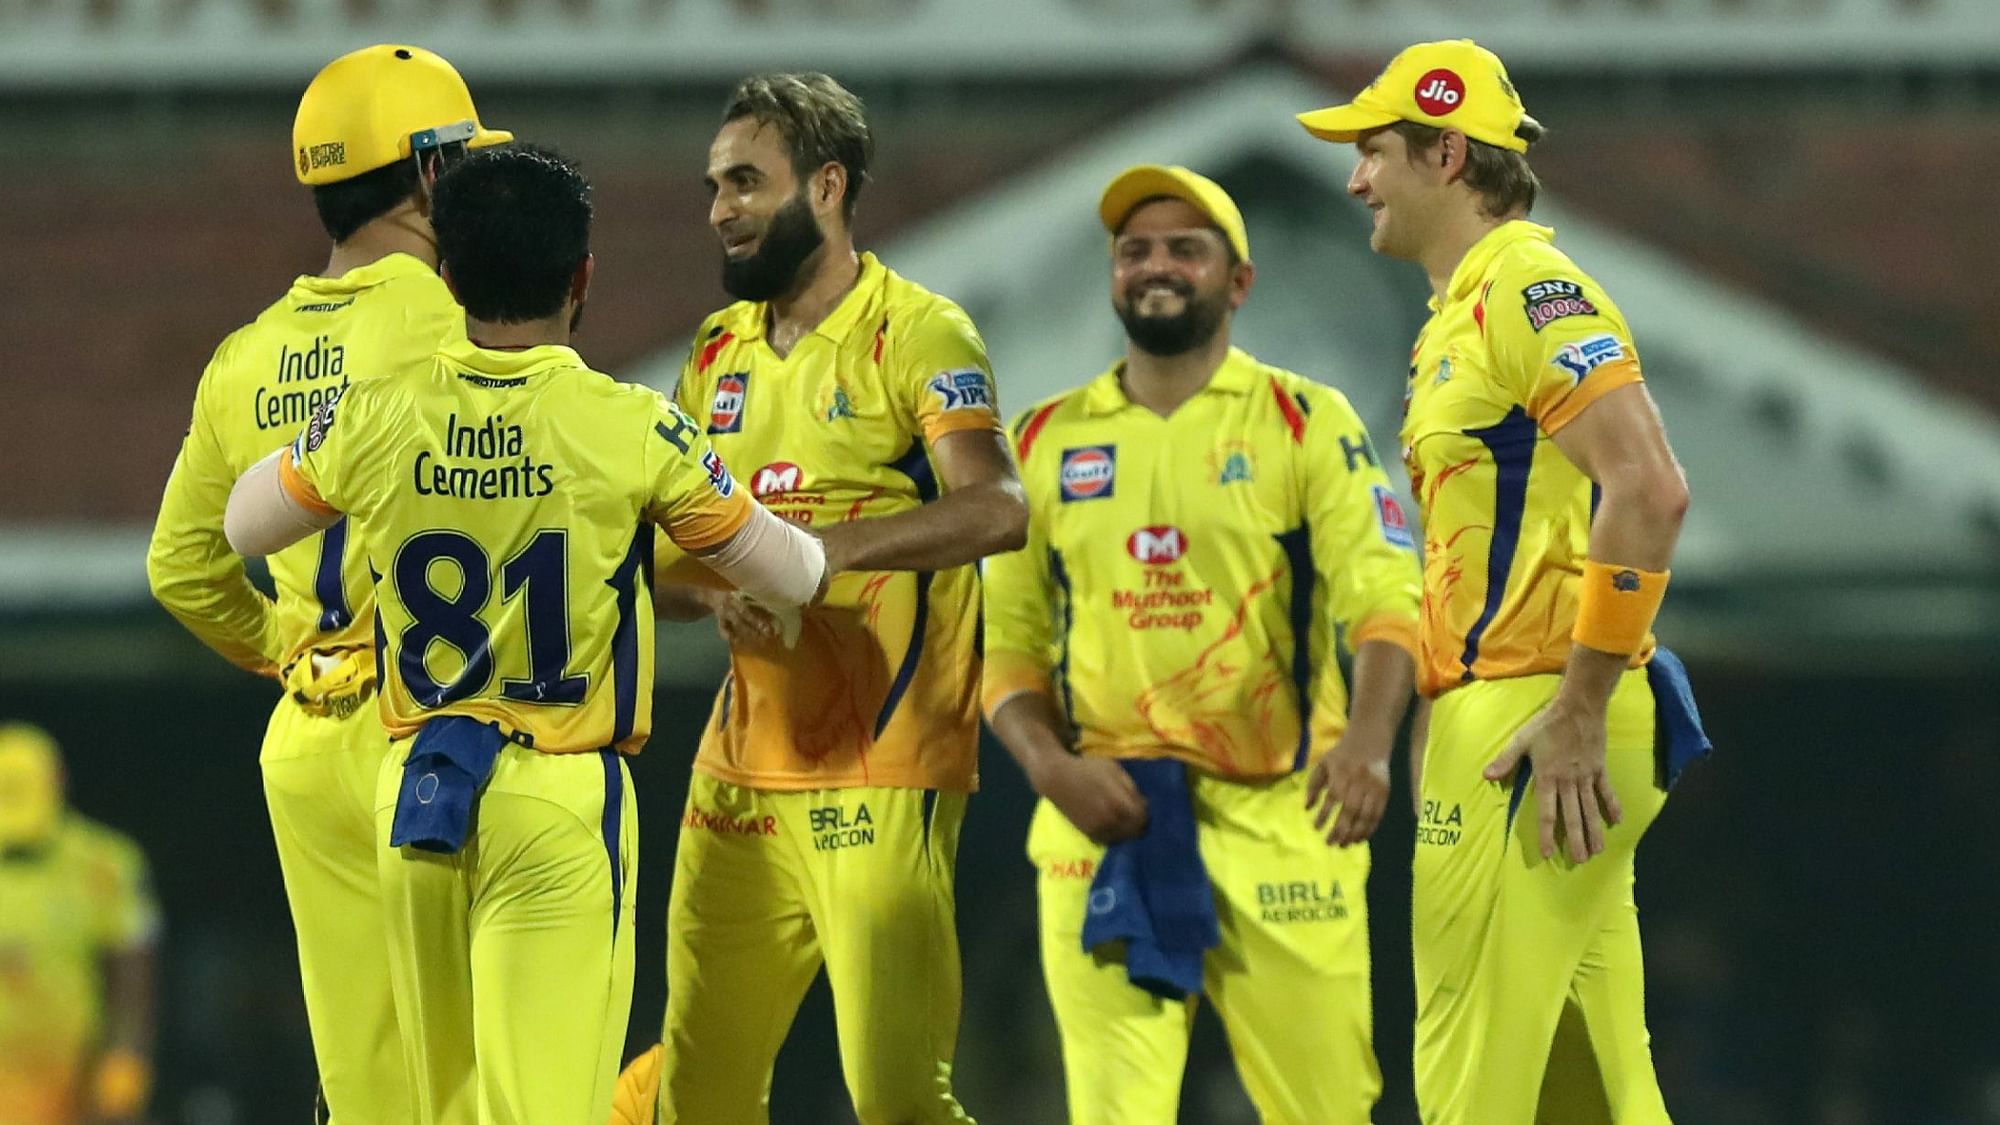 Chennai Super Kings, who now sit atop the table with 18 points, are now sure to end in top-2.